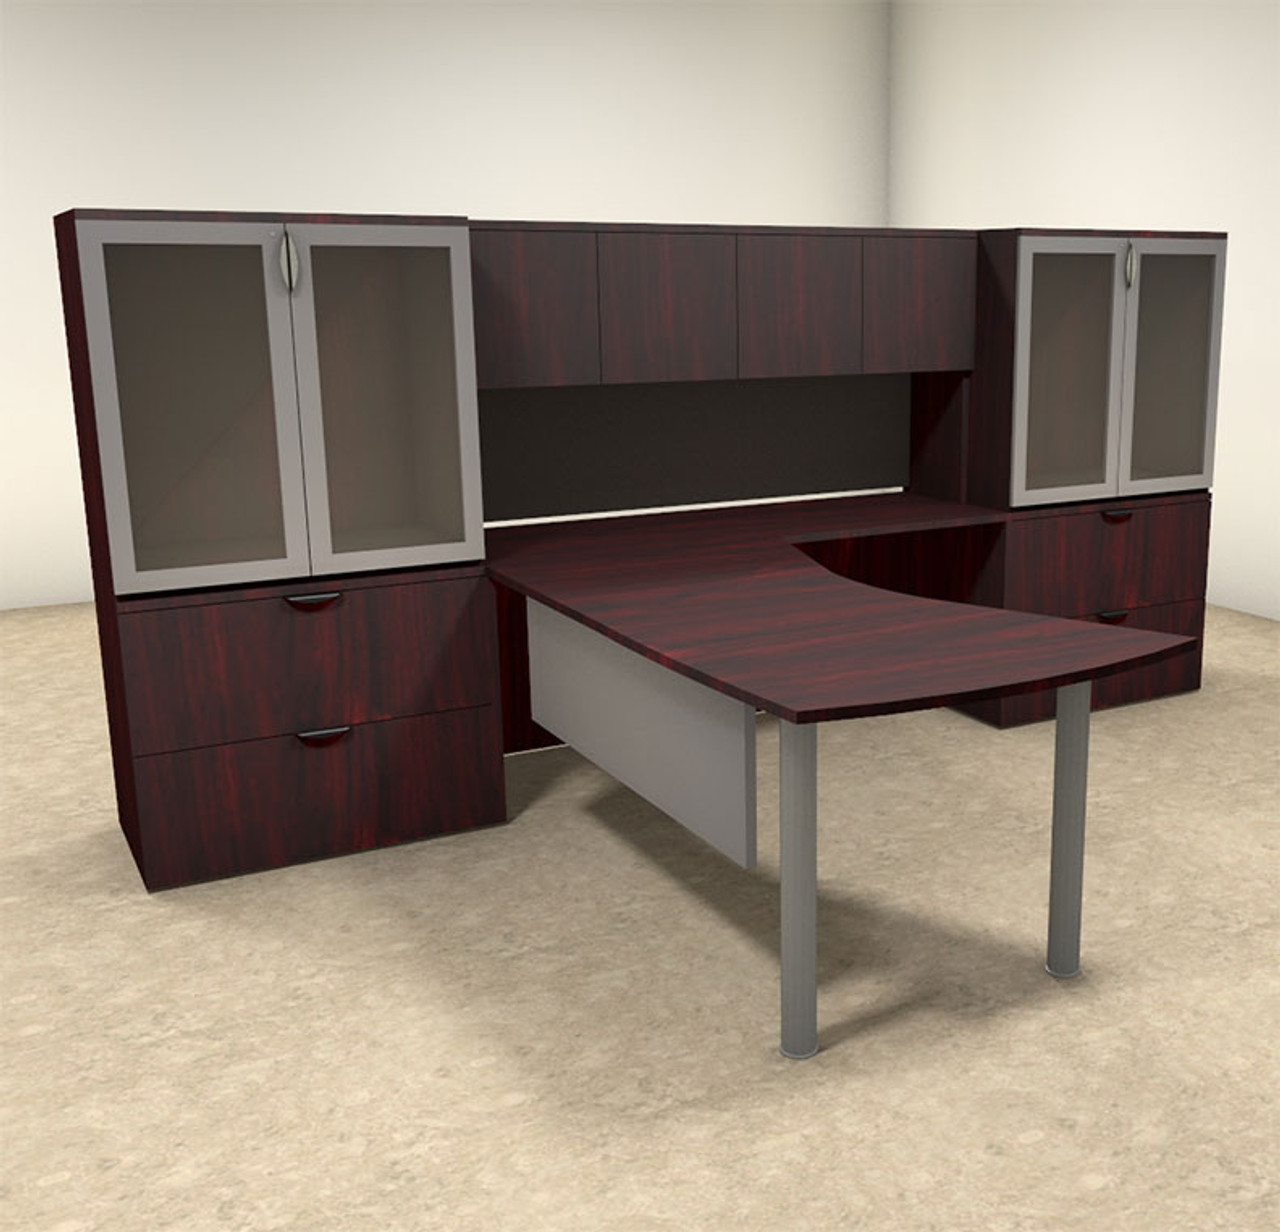 5pc L Shaped Modern Contemporary Executive Office Desk Set, #OF-CON-L3